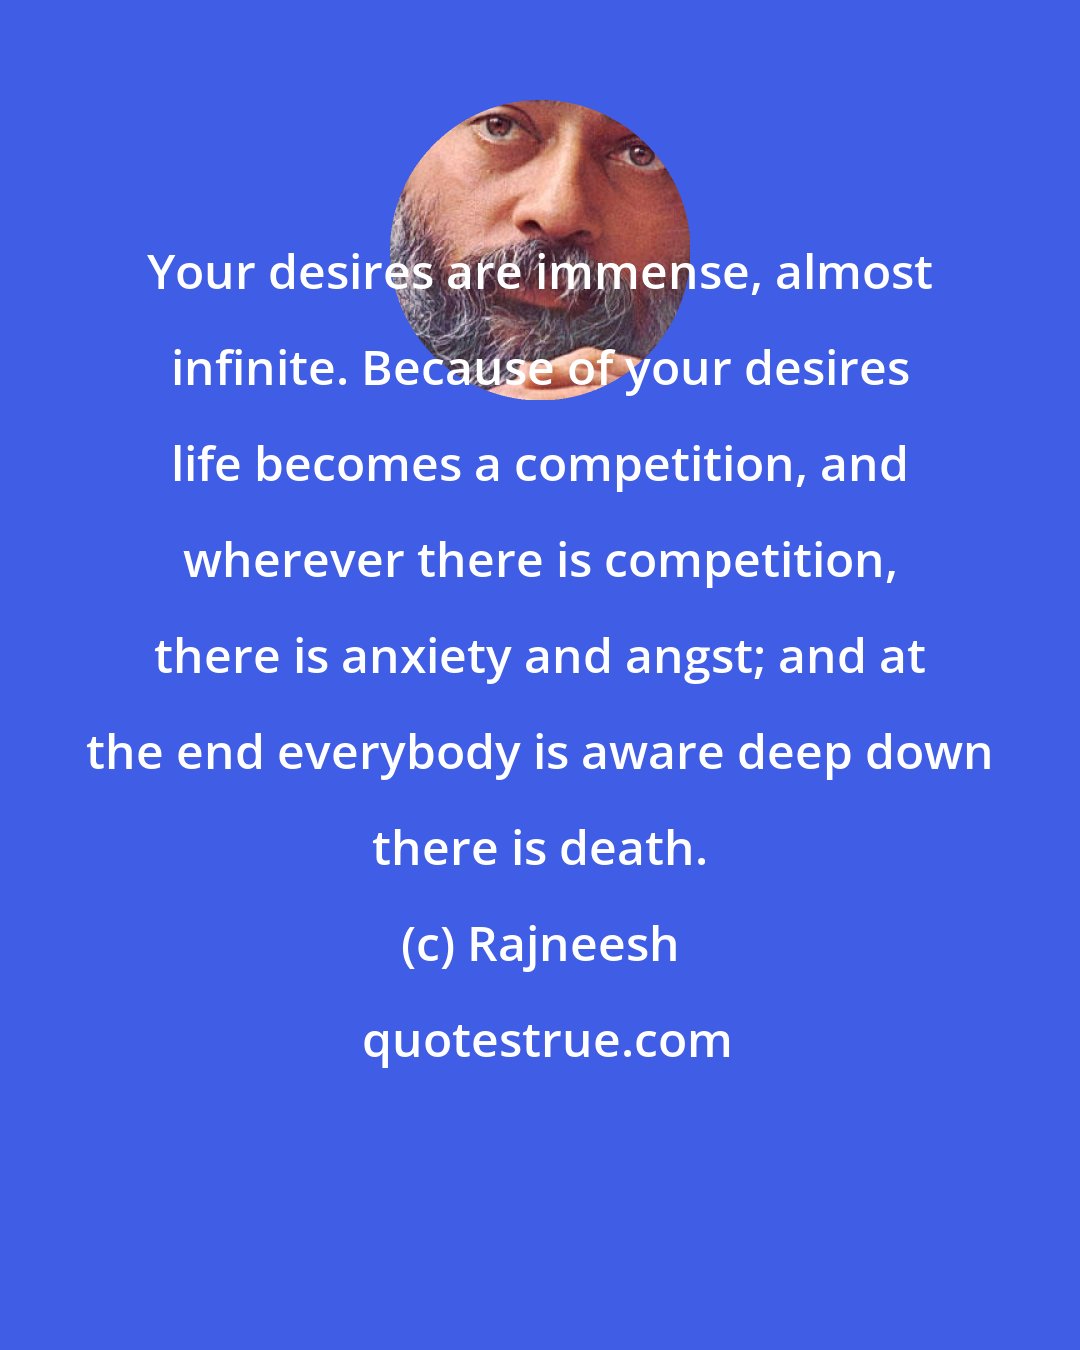 Rajneesh: Your desires are immense, almost infinite. Because of your desires life becomes a competition, and wherever there is competition, there is anxiety and angst; and at the end everybody is aware deep down there is death.